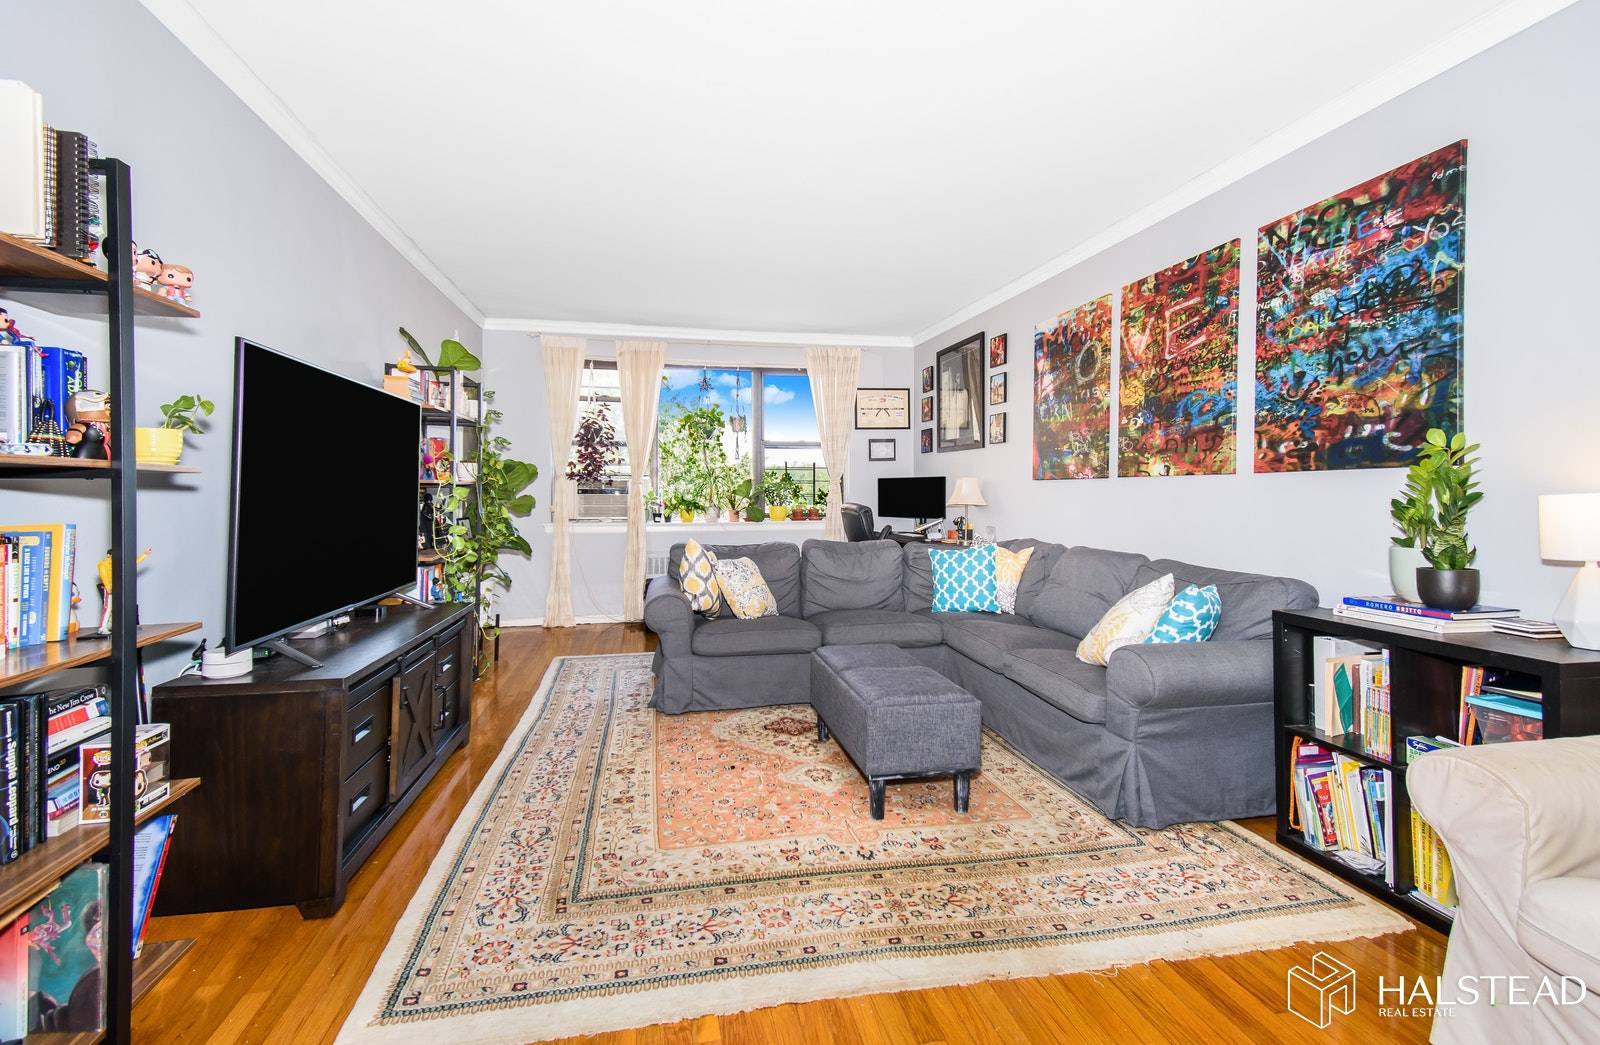 New to the market, and placed in the most central of Riverdale's locations, find a spacious split two bedroom, two bathroom home, with windows and closets galore.